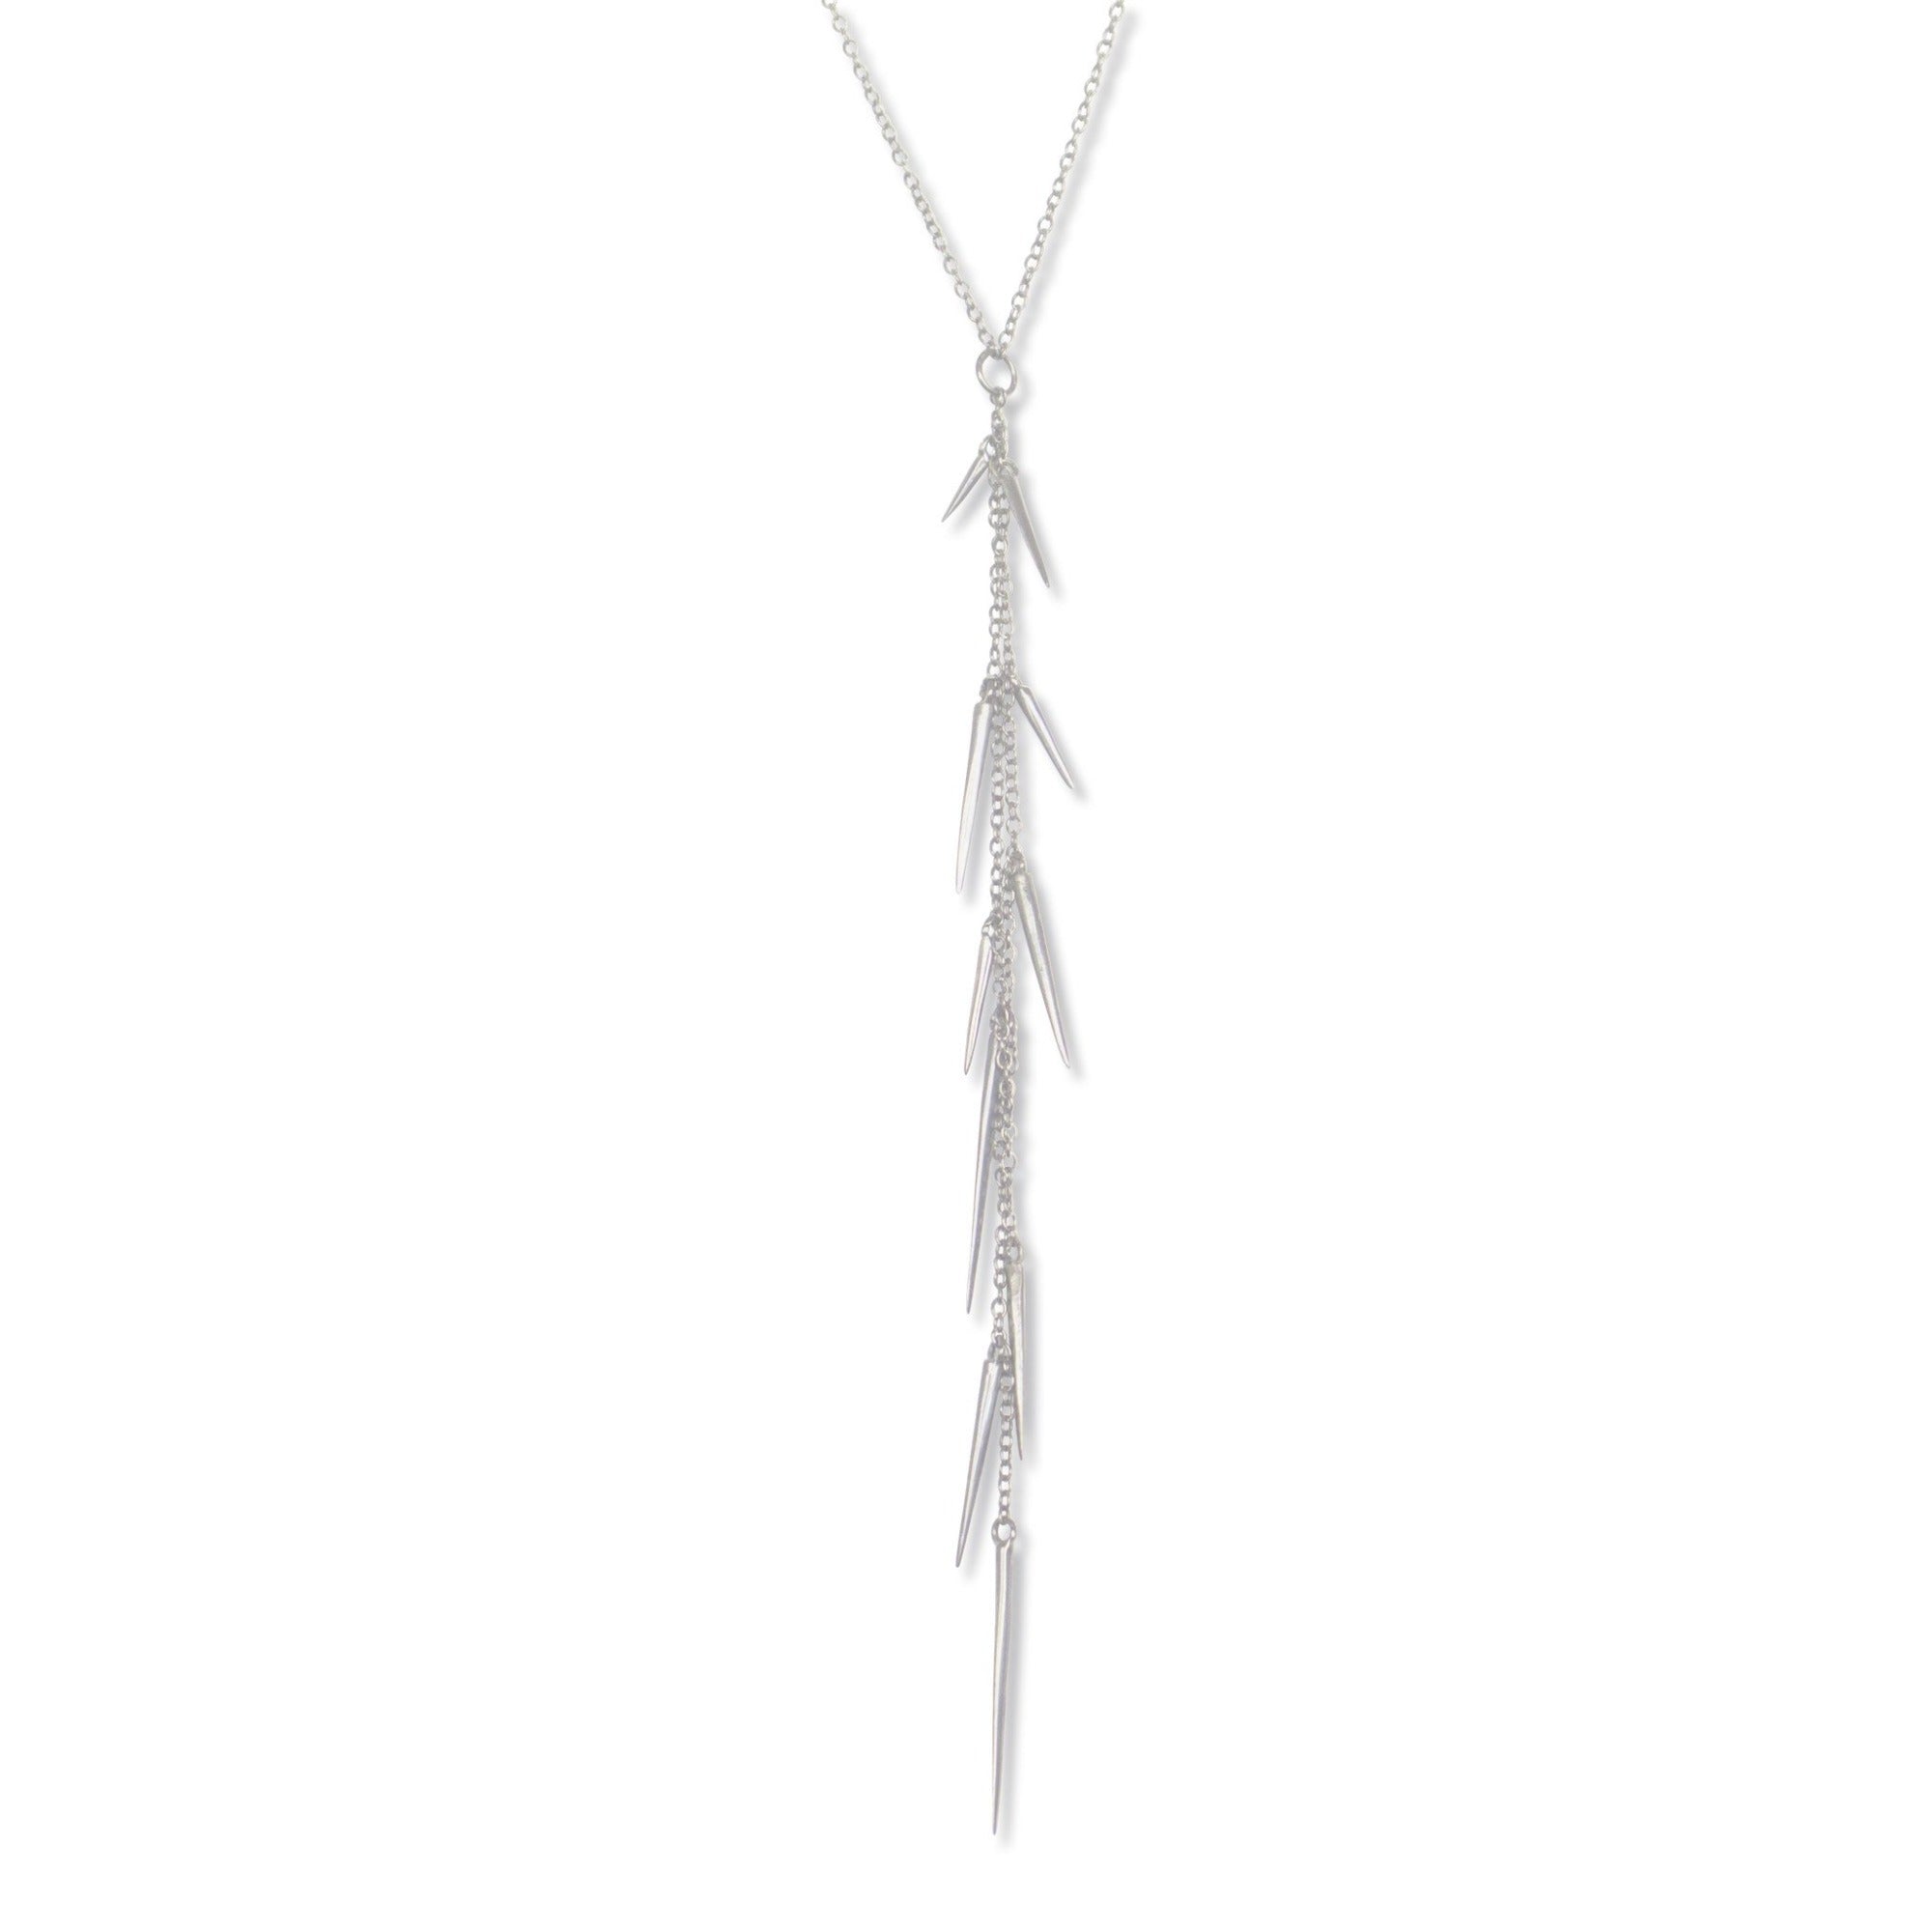  small point long drop necklace